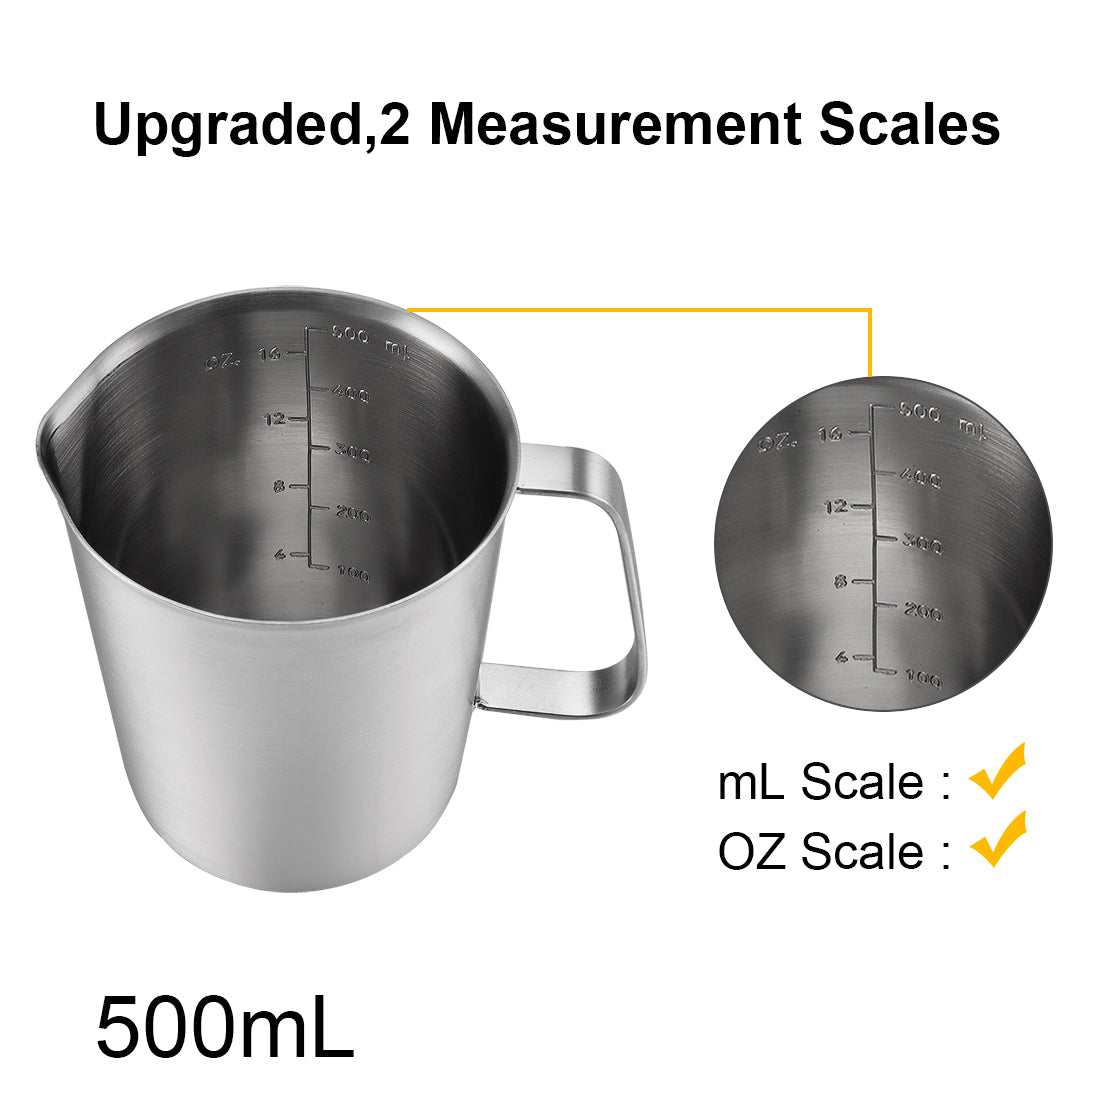 uxcell Uxcell Measuring Cup, Upgraded, 2 Measurement Scales, Including L Scale, Ounce Scale, Stainless Steel Measuring Cup w Marking with Handle, 16 Ounces, 500mL